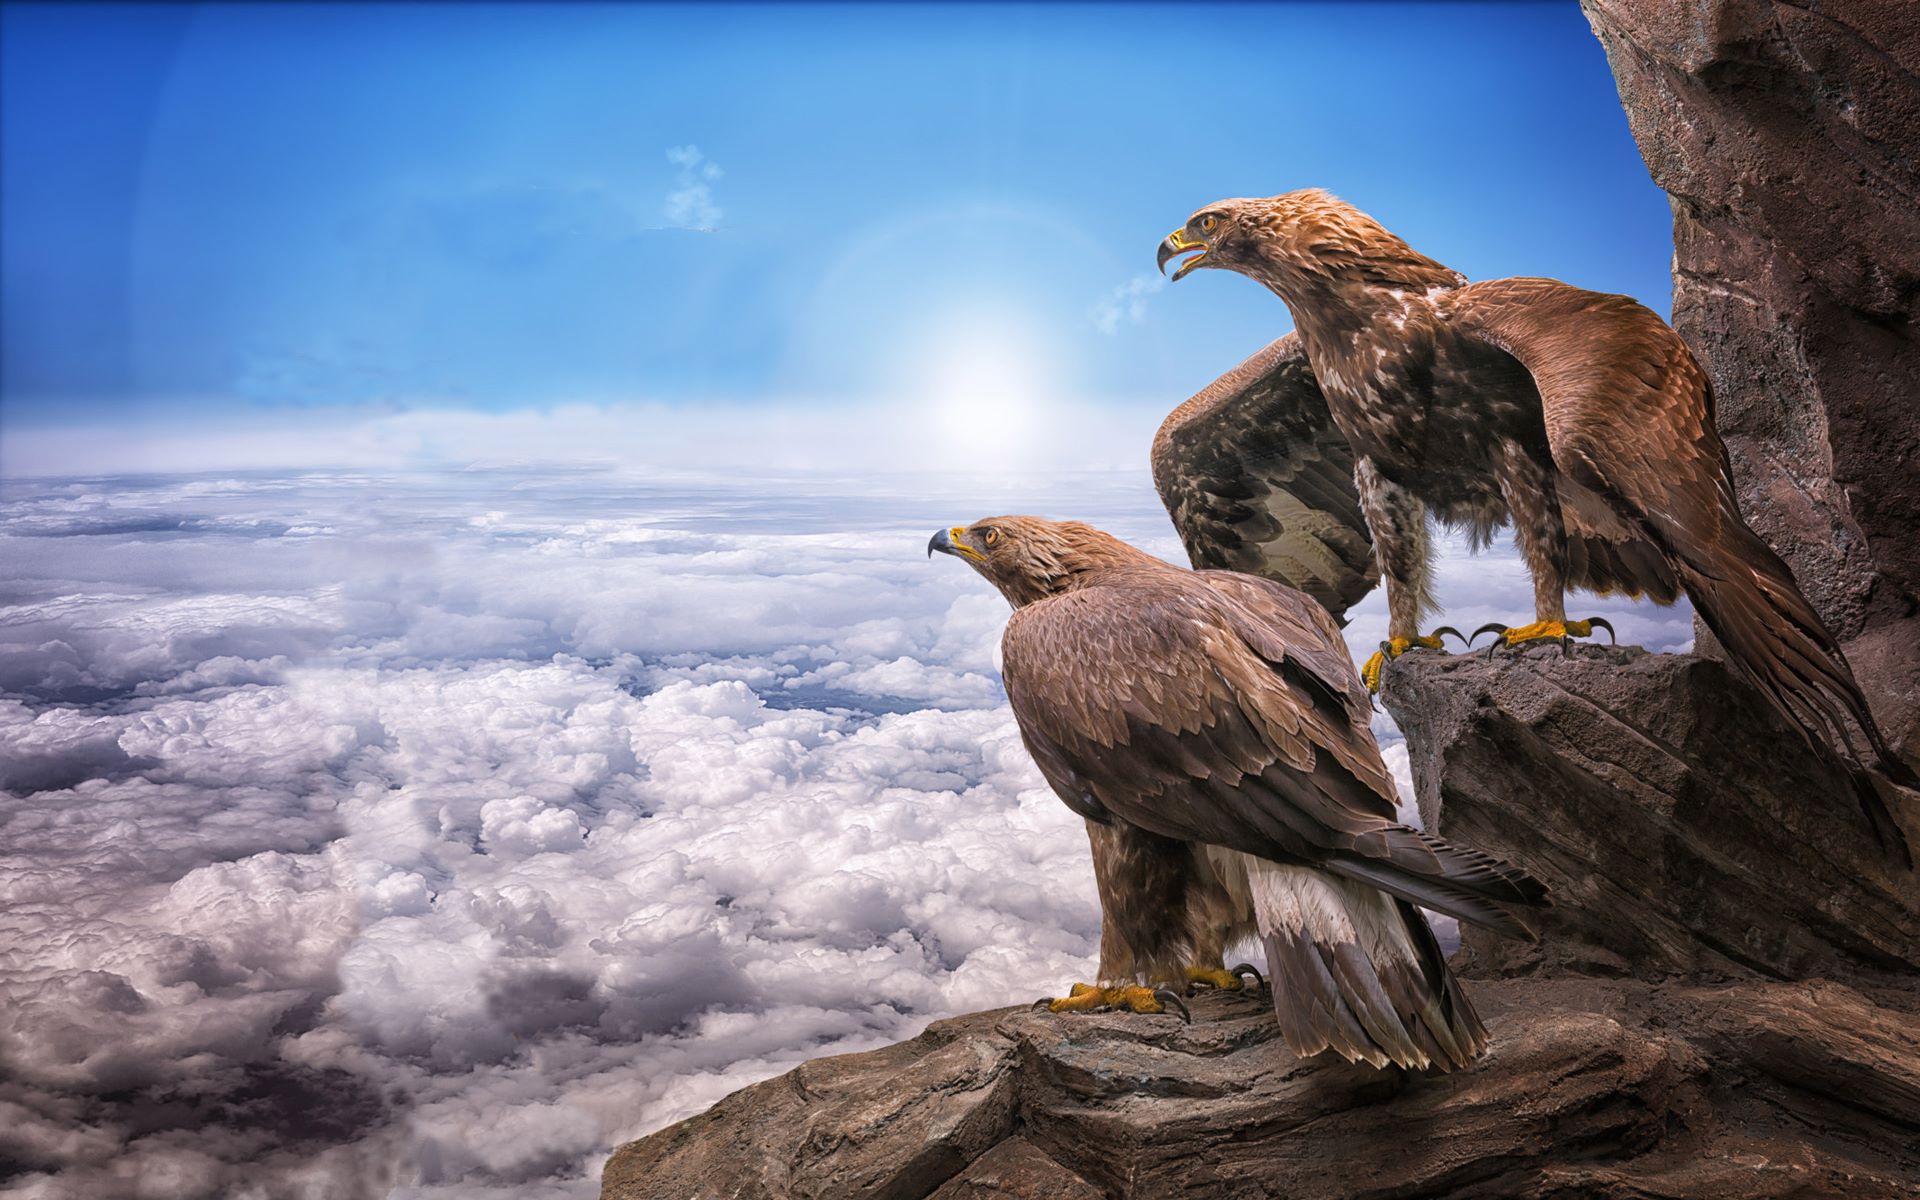 A pair of eagles on a cliff